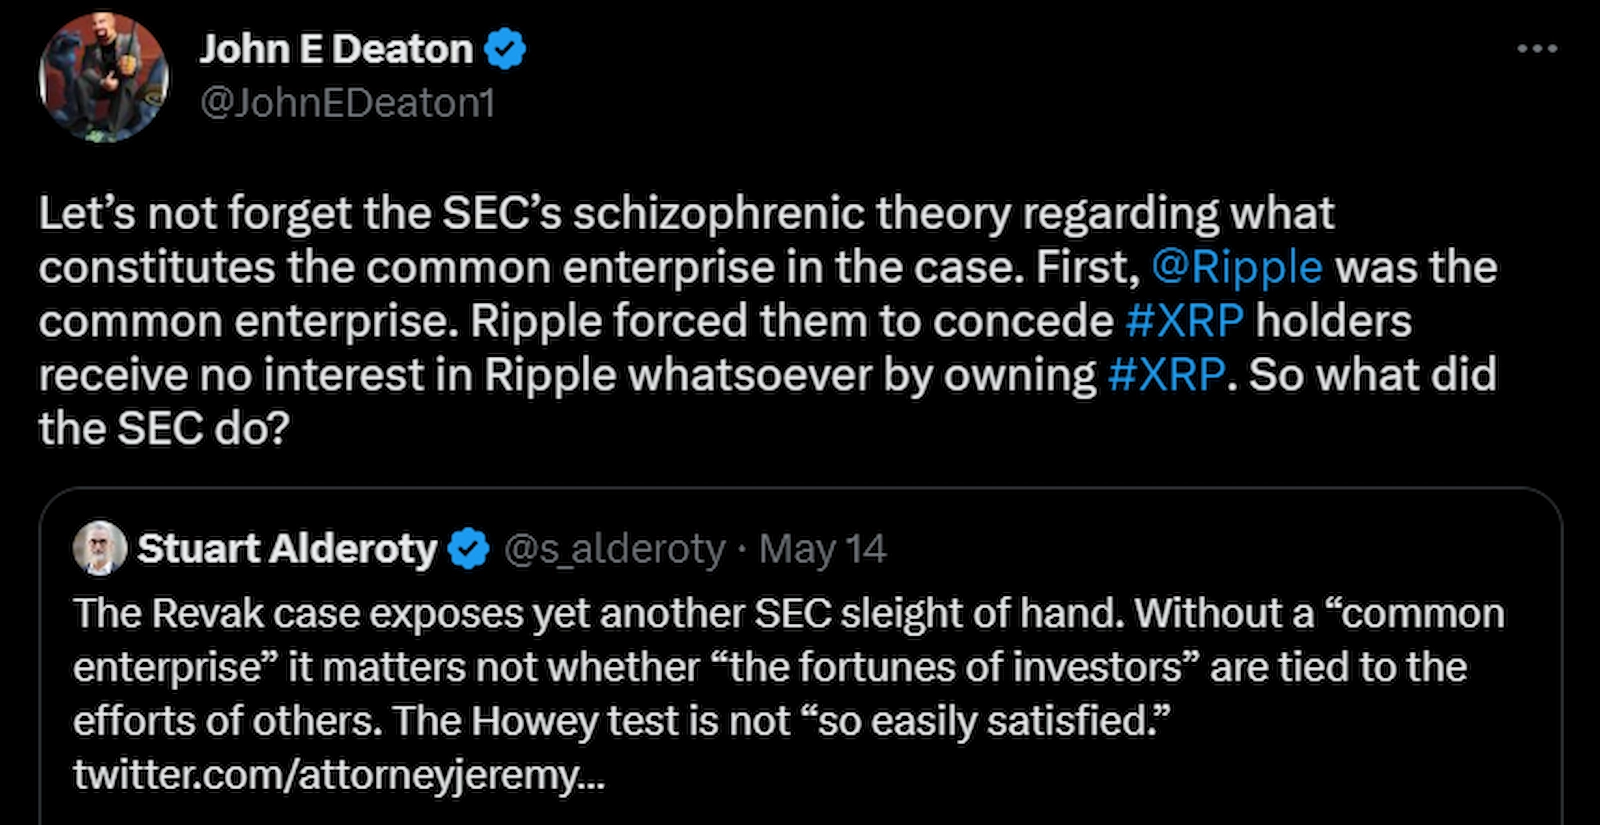 Deaton stated that the SEC's theory on common enterprise was schizophrenic